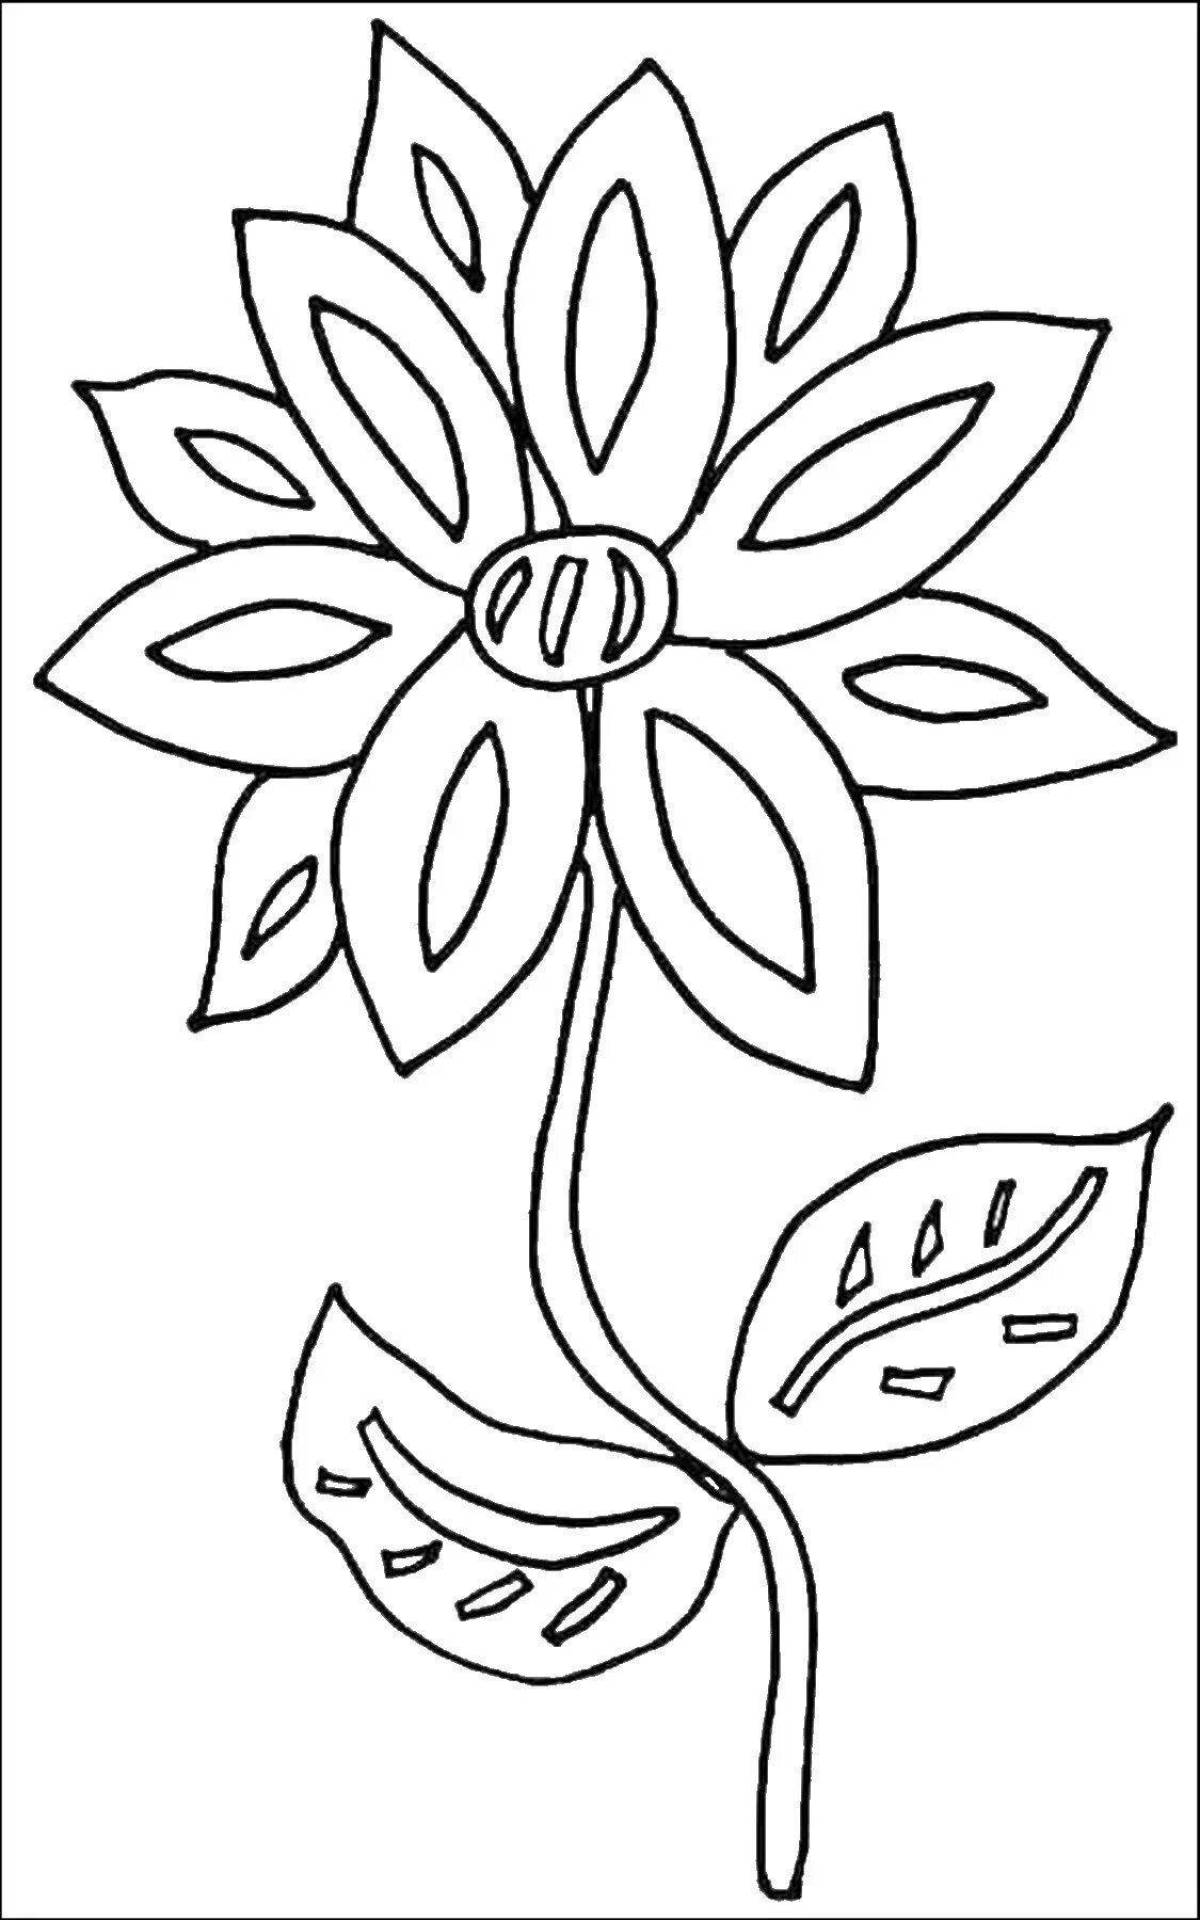 Coloring ethereal unknown flower